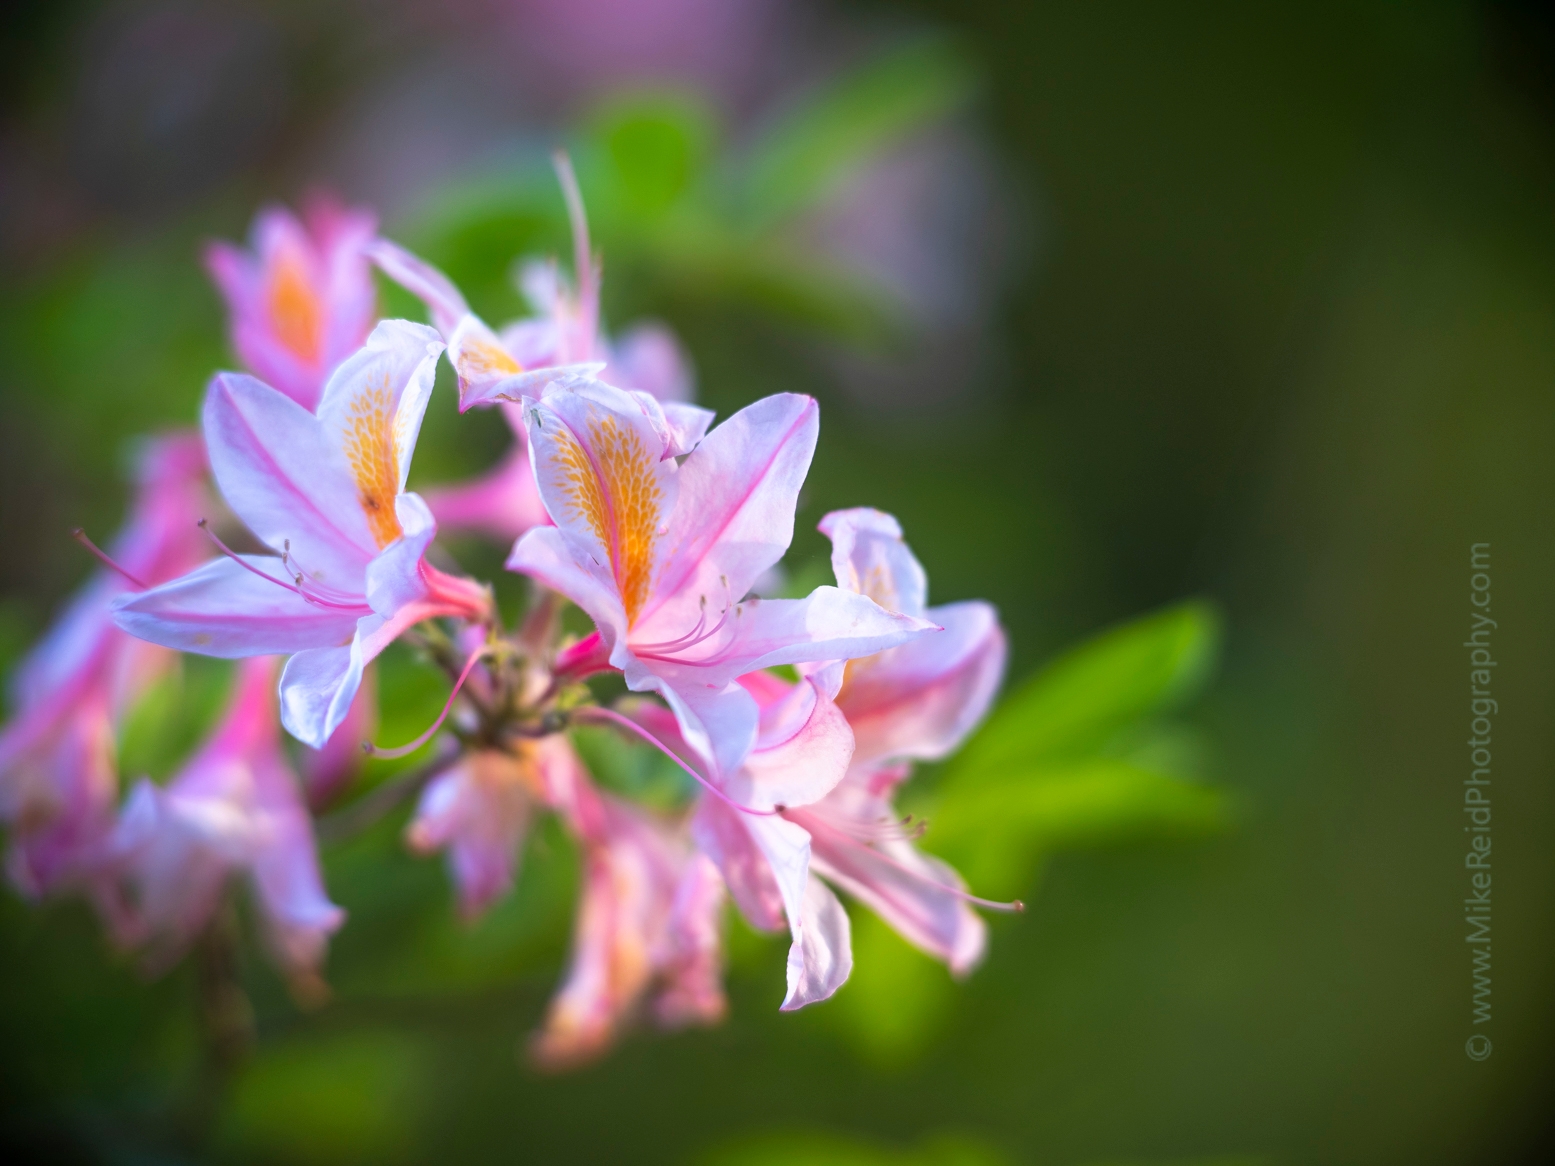 Pink and White Cluster of Azaleas.jpg 